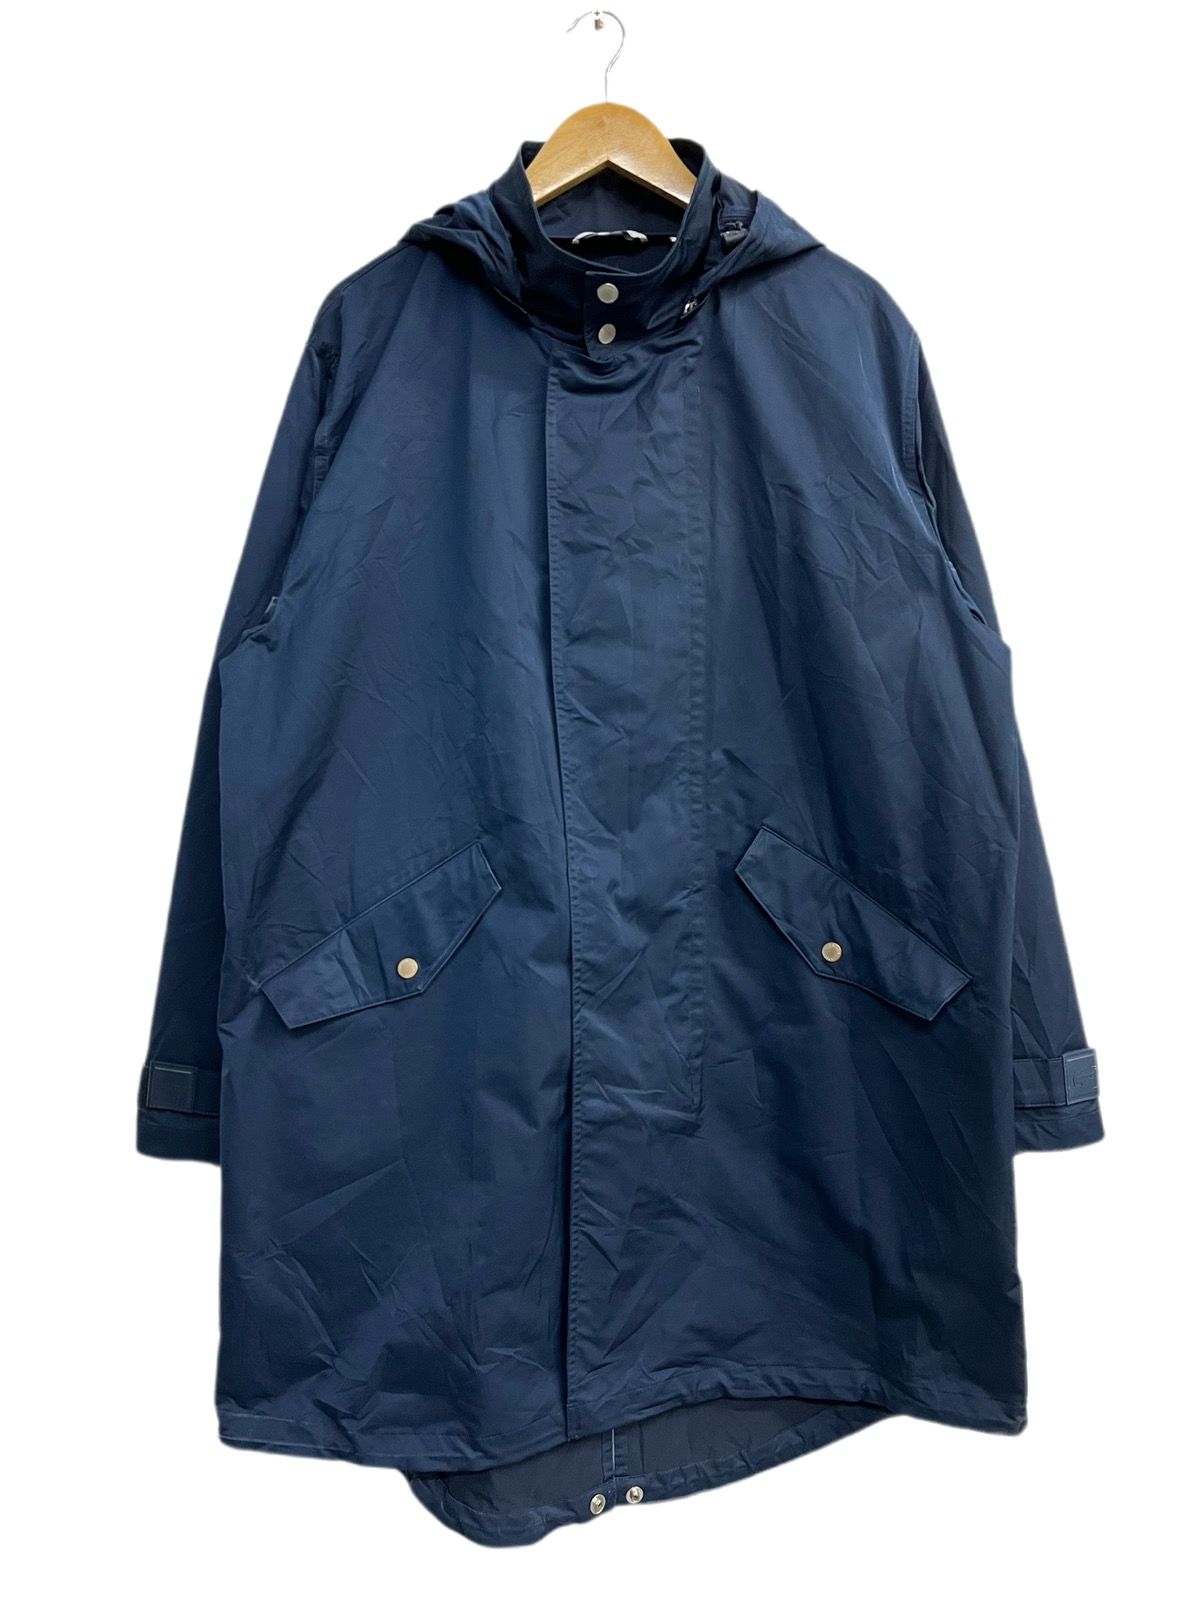 Lacoste Trench Coat - 1